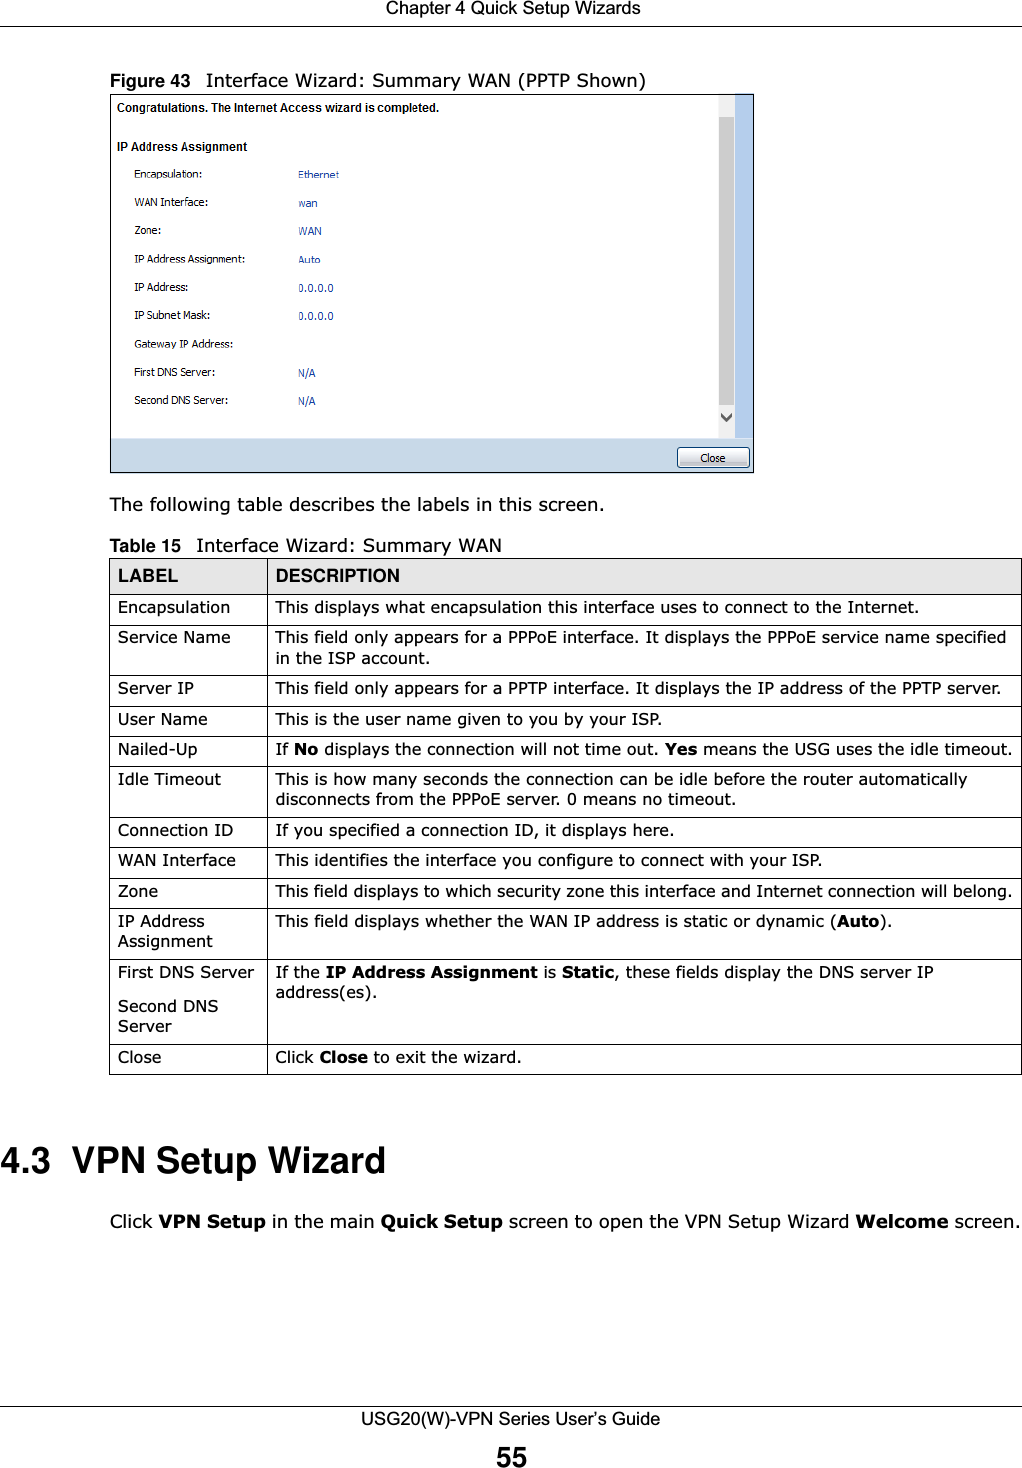  Chapter 4 Quick Setup WizardsUSG20(W)-VPN Series User’s Guide55Figure 43   Interface Wizard: Summary WAN (PPTP Shown)   The following table describes the labels in this screen. 4.3  VPN Setup WizardClick VPN Setup in the main Quick Setup screen to open the VPN Setup Wizard Welcome screen.Table 15   Interface Wizard: Summary WANLABEL DESCRIPTIONEncapsulation This displays what encapsulation this interface uses to connect to the Internet.Service Name This field only appears for a PPPoE interface. It displays the PPPoE service name specified in the ISP account. Server IP This field only appears for a PPTP interface. It displays the IP address of the PPTP server.User Name This is the user name given to you by your ISP. Nailed-Up If No displays the connection will not time out. Yes means the USG uses the idle timeout.Idle Timeout This is how many seconds the connection can be idle before the router automatically disconnects from the PPPoE server. 0 means no timeout.Connection ID If you specified a connection ID, it displays here.WAN Interface This identifies the interface you configure to connect with your ISP.Zone This field displays to which security zone this interface and Internet connection will belong.IP Address AssignmentThis field displays whether the WAN IP address is static or dynamic (Auto).First DNS ServerSecond DNS ServerIf the IP Address Assignment is Static, these fields display the DNS server IP address(es).Close Click Close to exit the wizard.